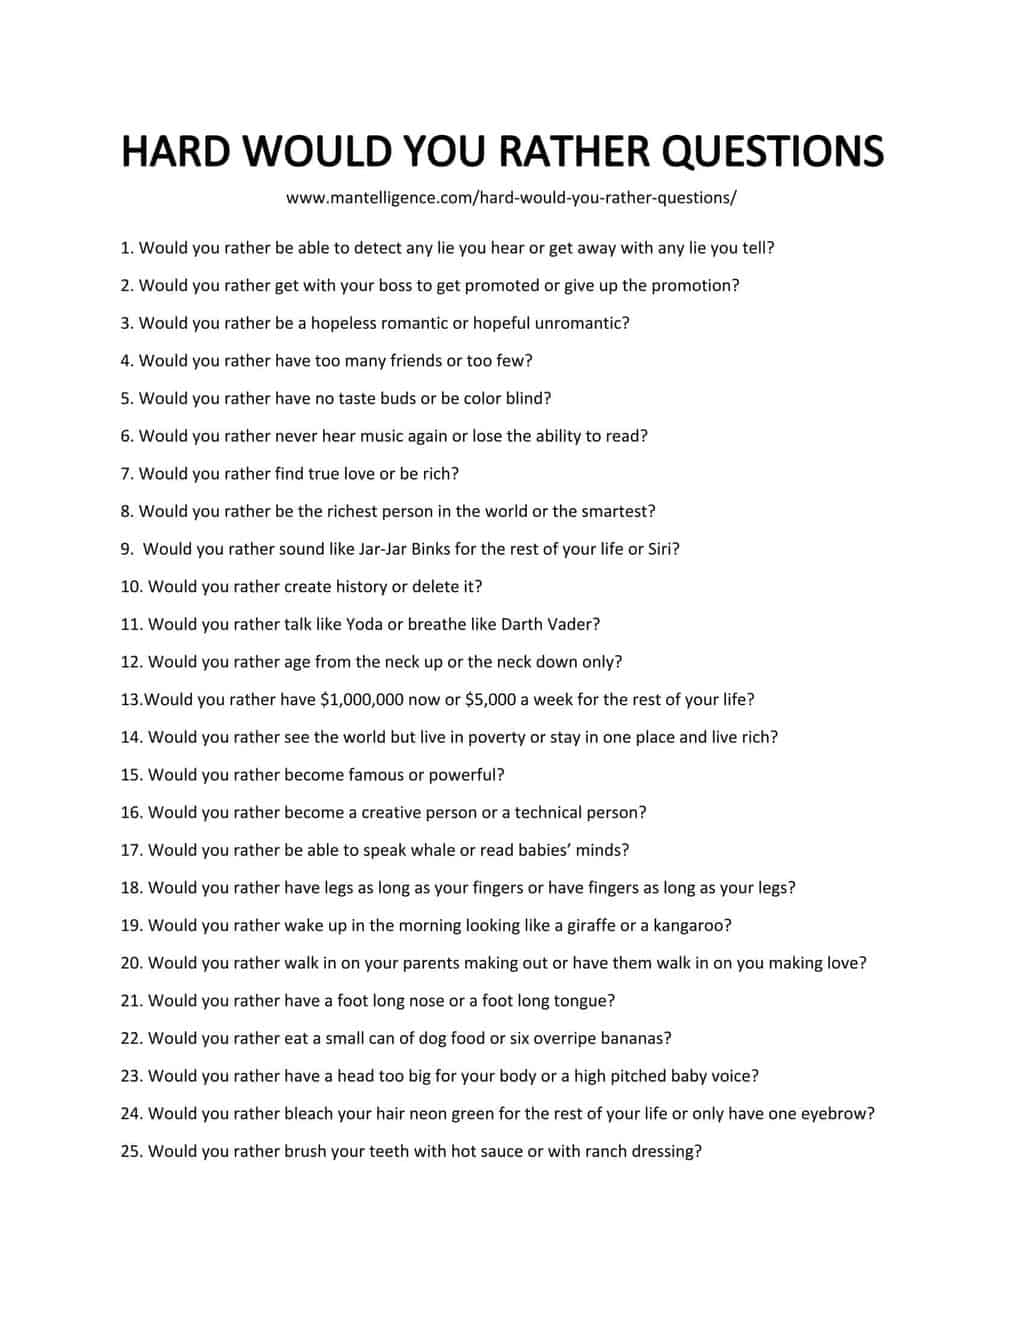 Downloadable and printable list of hard would you rather questions as jpg or pdf